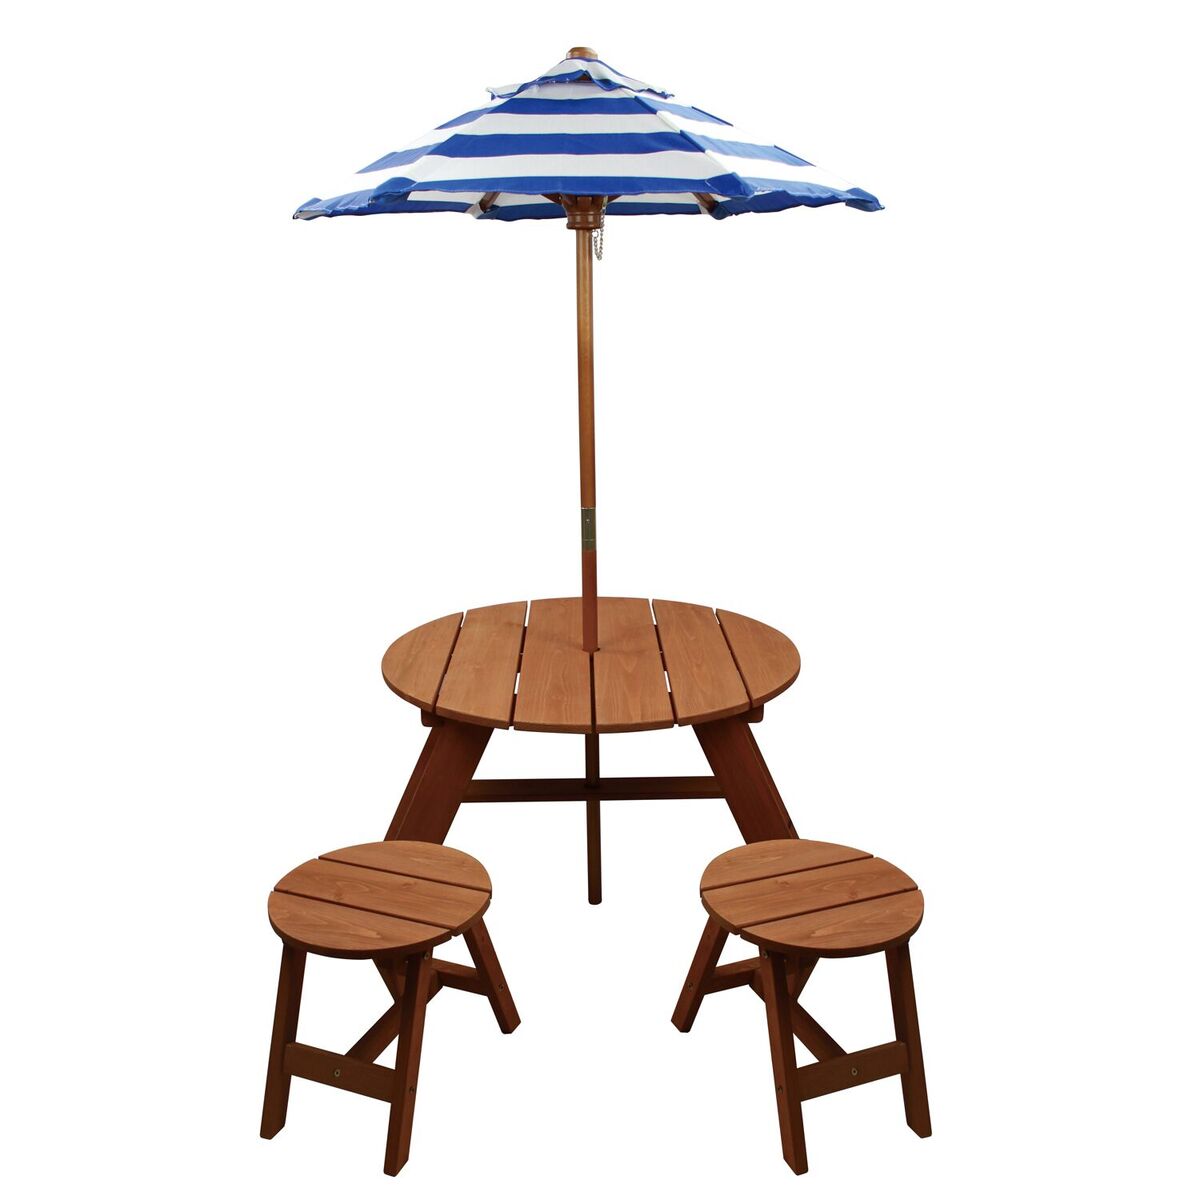 999 Wood Round Table With Umbrella & 2 Chairs